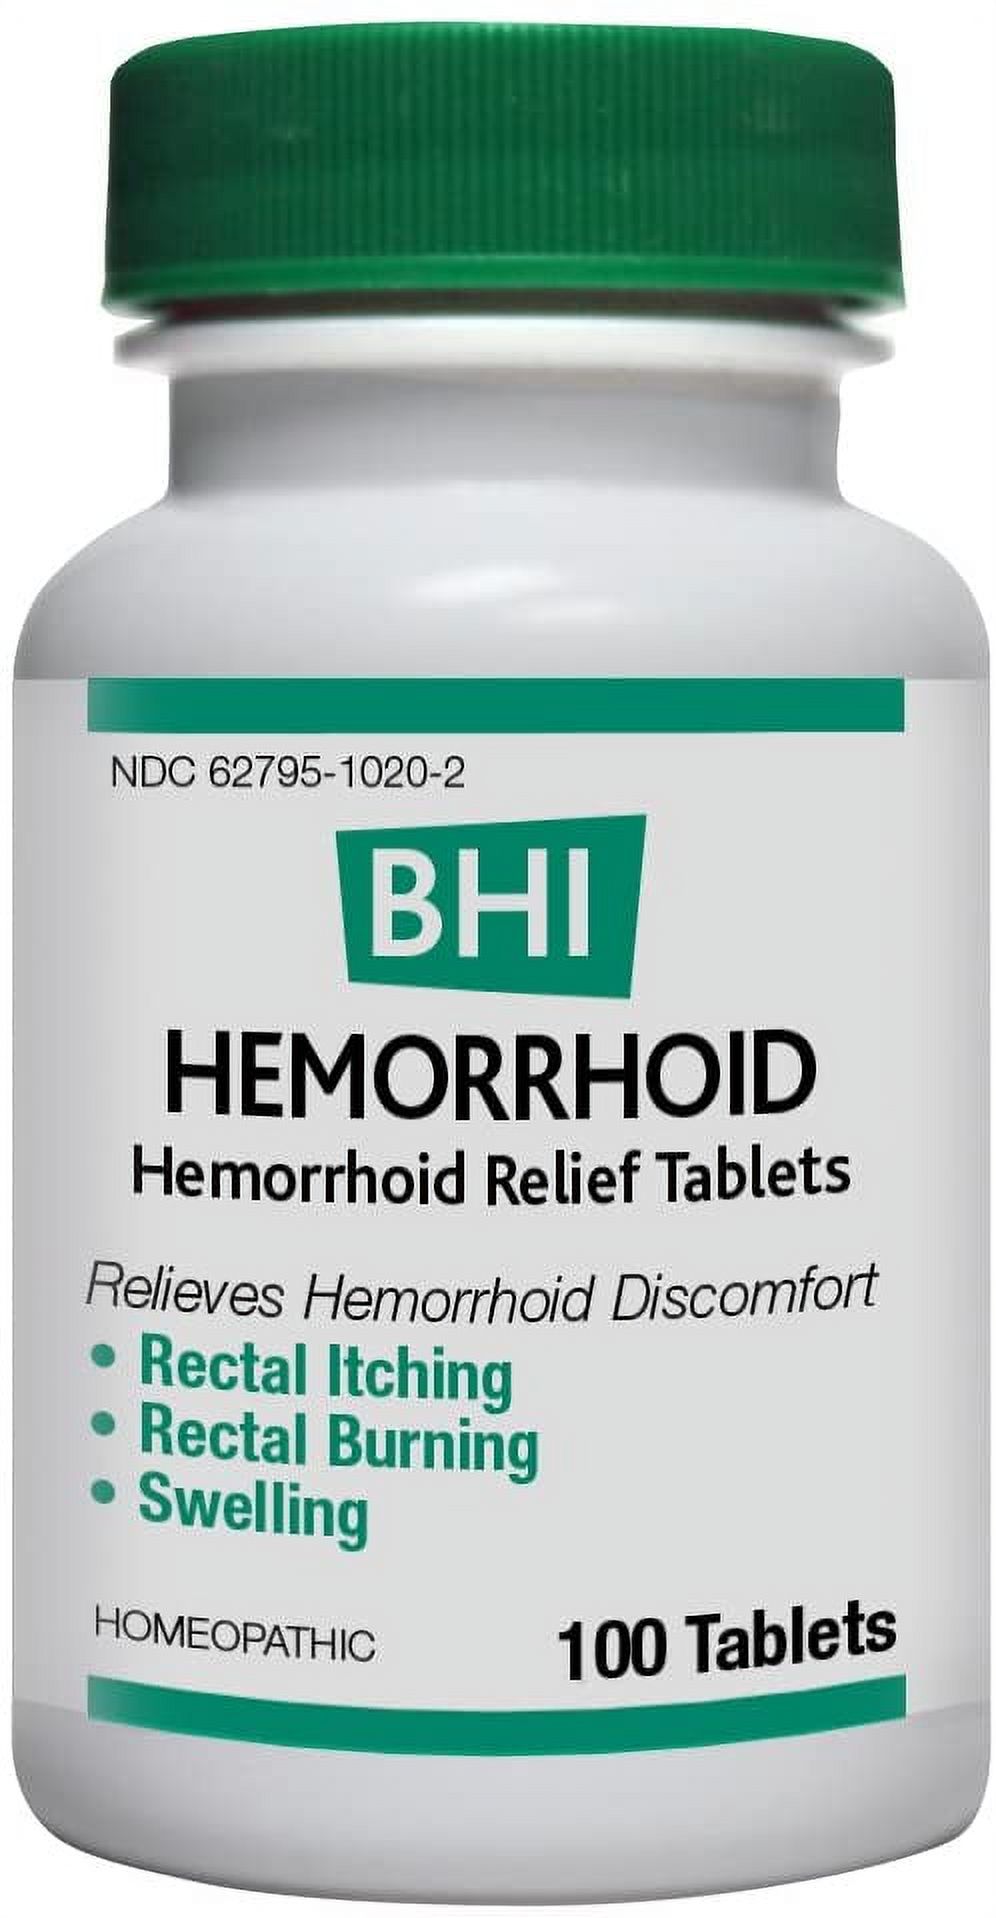 BHI Hemorrhoid Relief Tablets, Natural Homeopathic, 100 Tabs - image 1 of 5